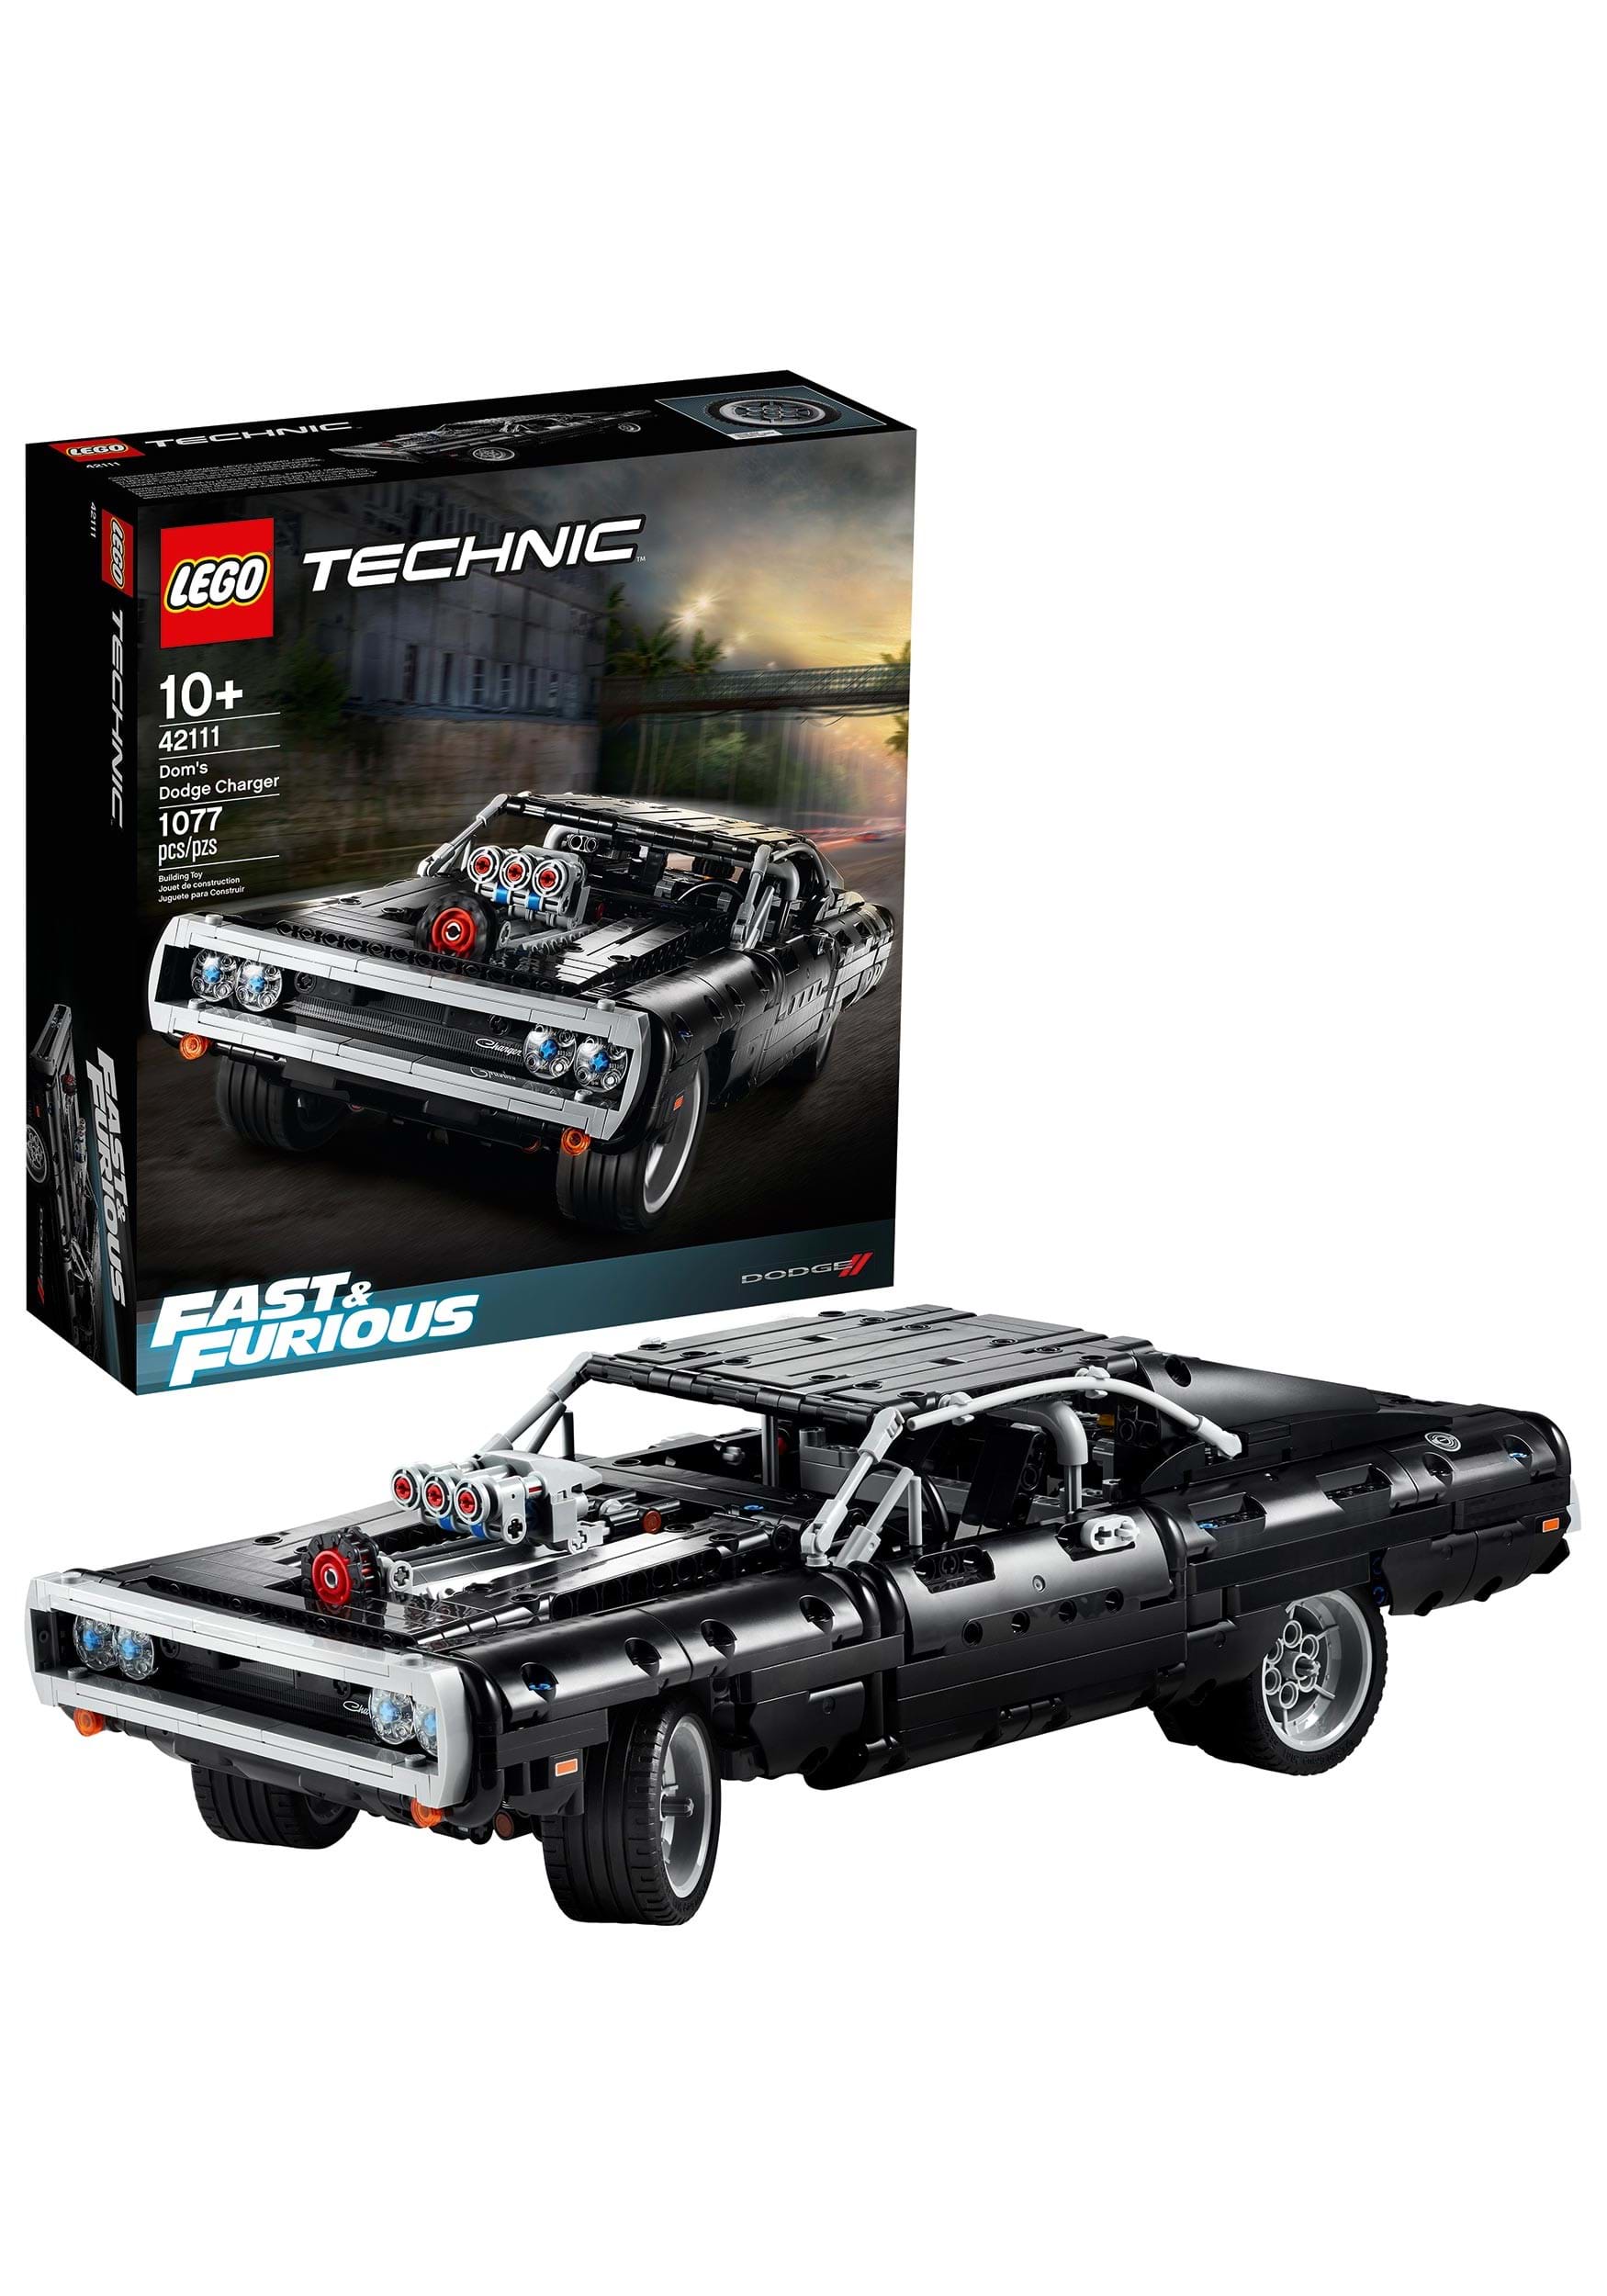 Fast & Furious LEGO Dom's Dodge Charger Building Set